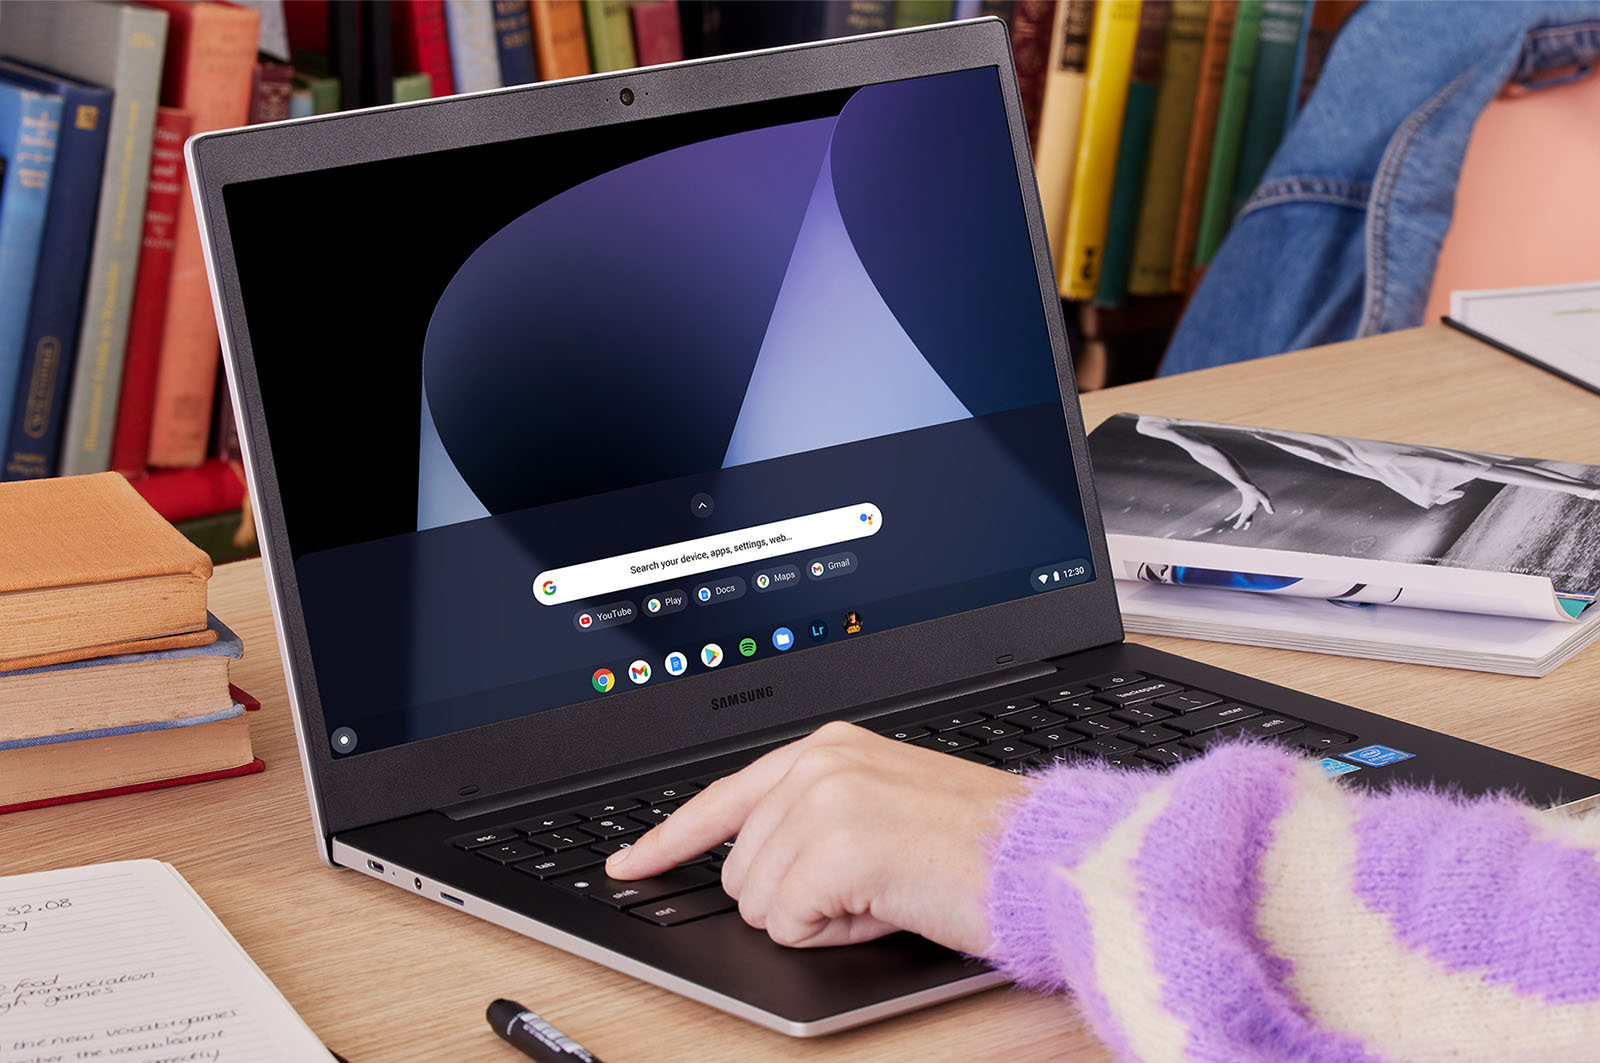 Using Chrome OS on a laptop screen